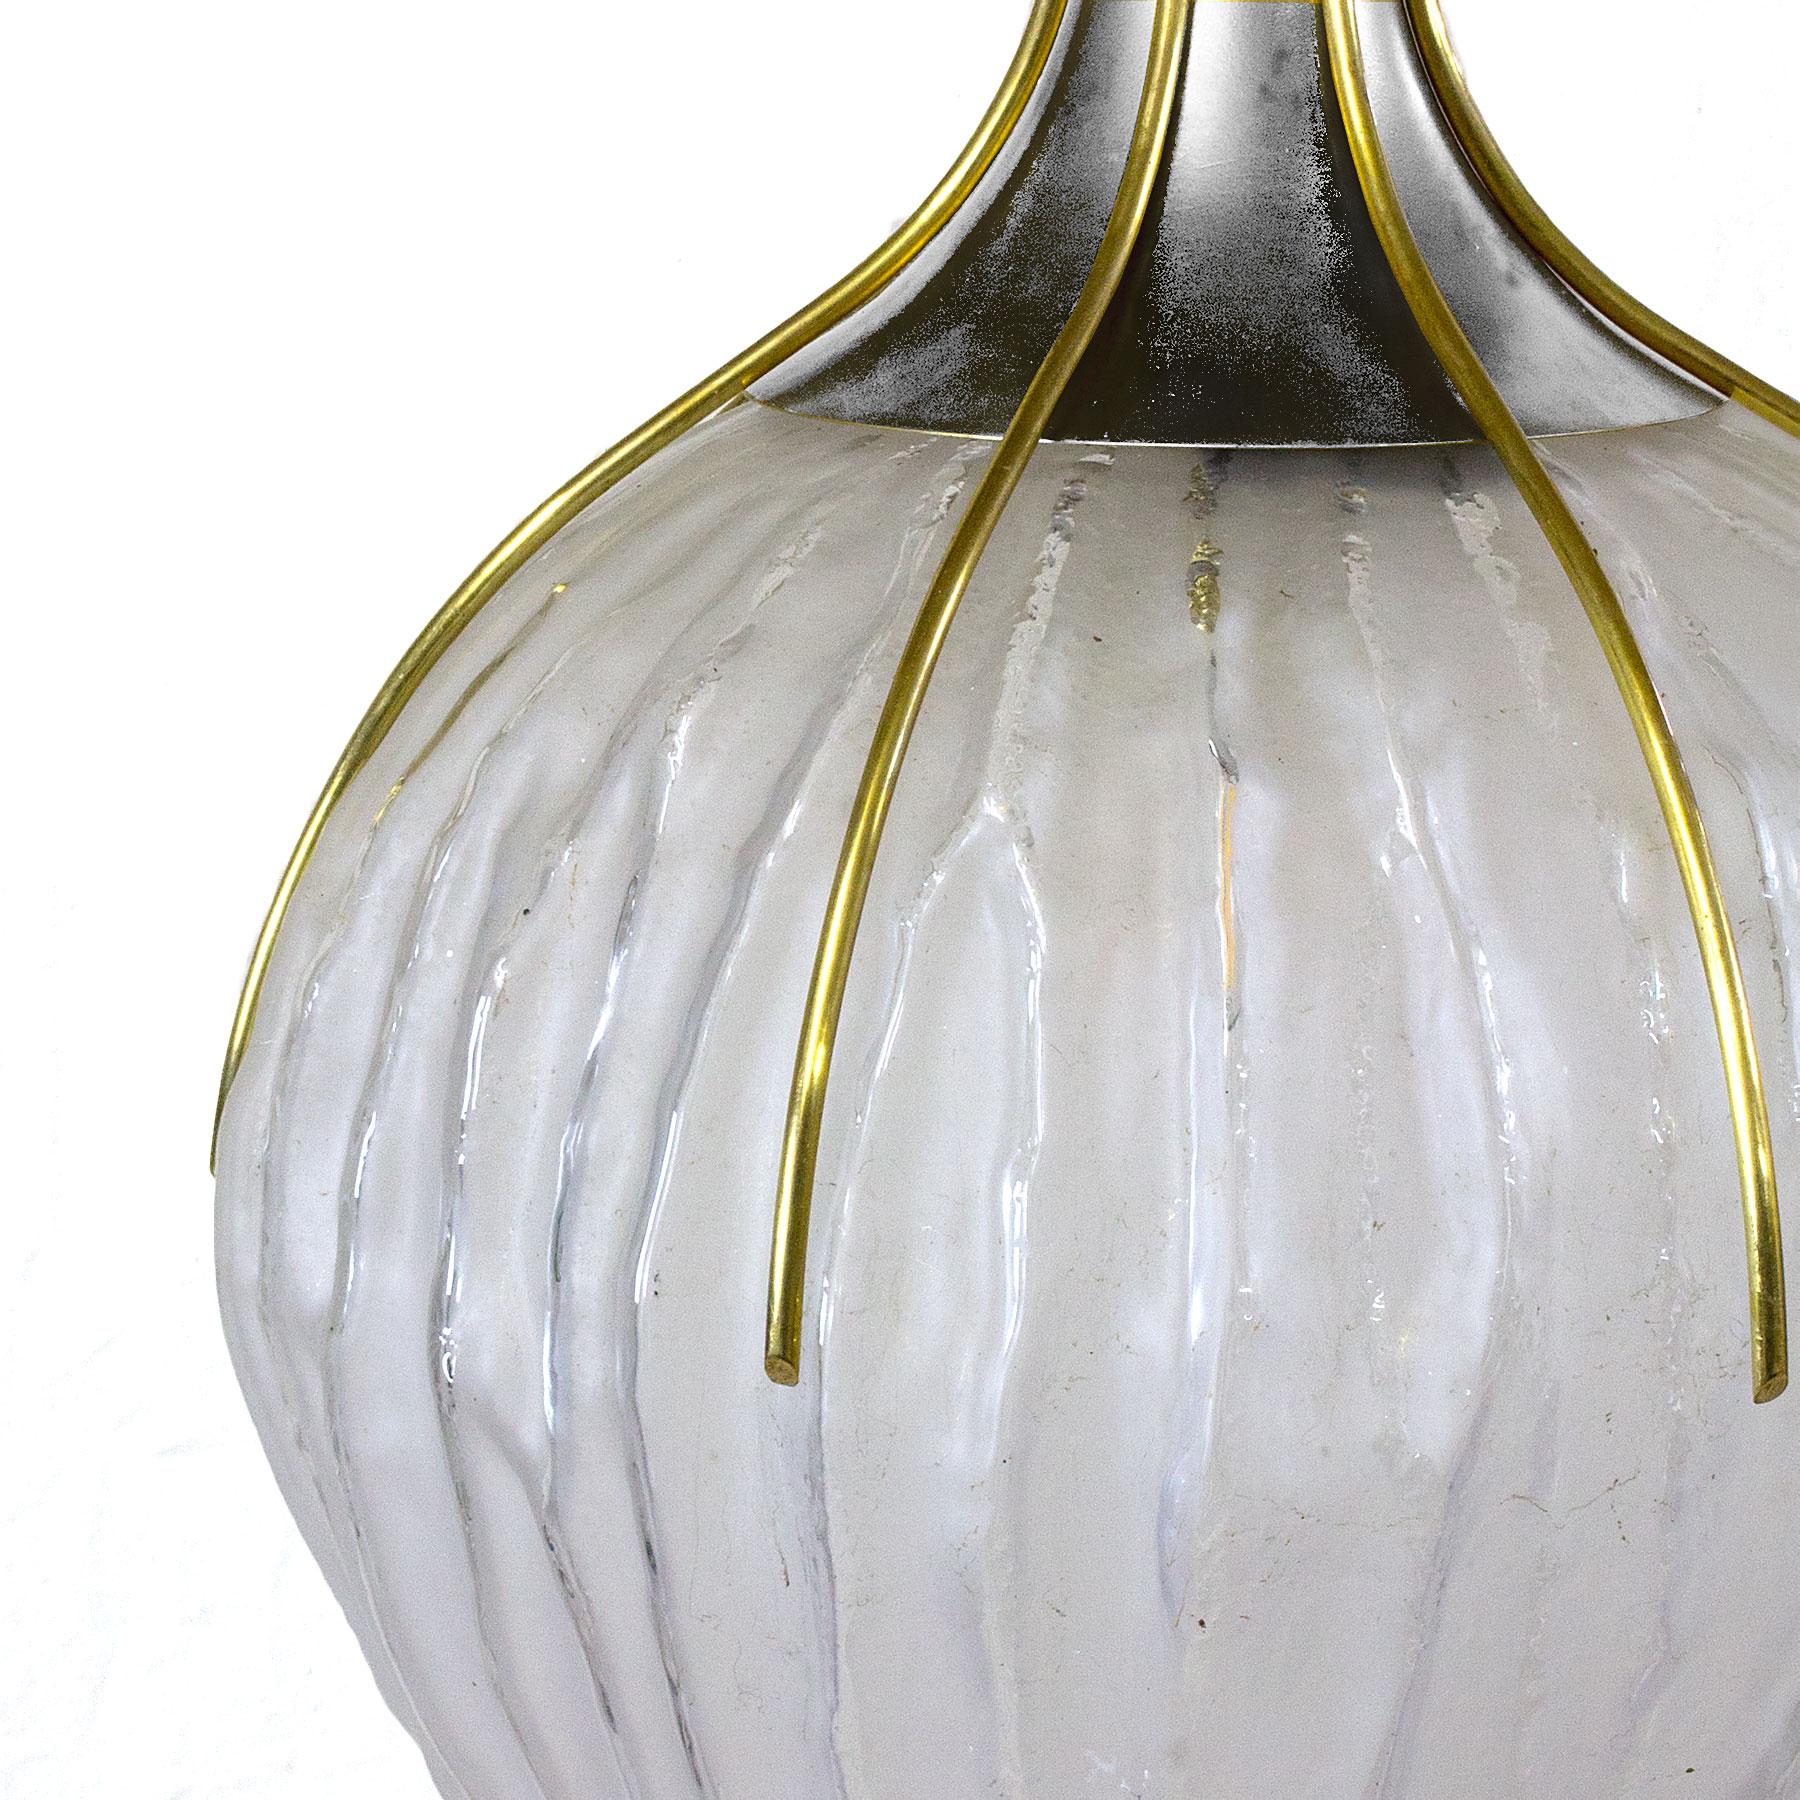 Brass Mid-Century Modern Hanging Lantern by Esperia, Acid Etched Glass Ball - Italy For Sale